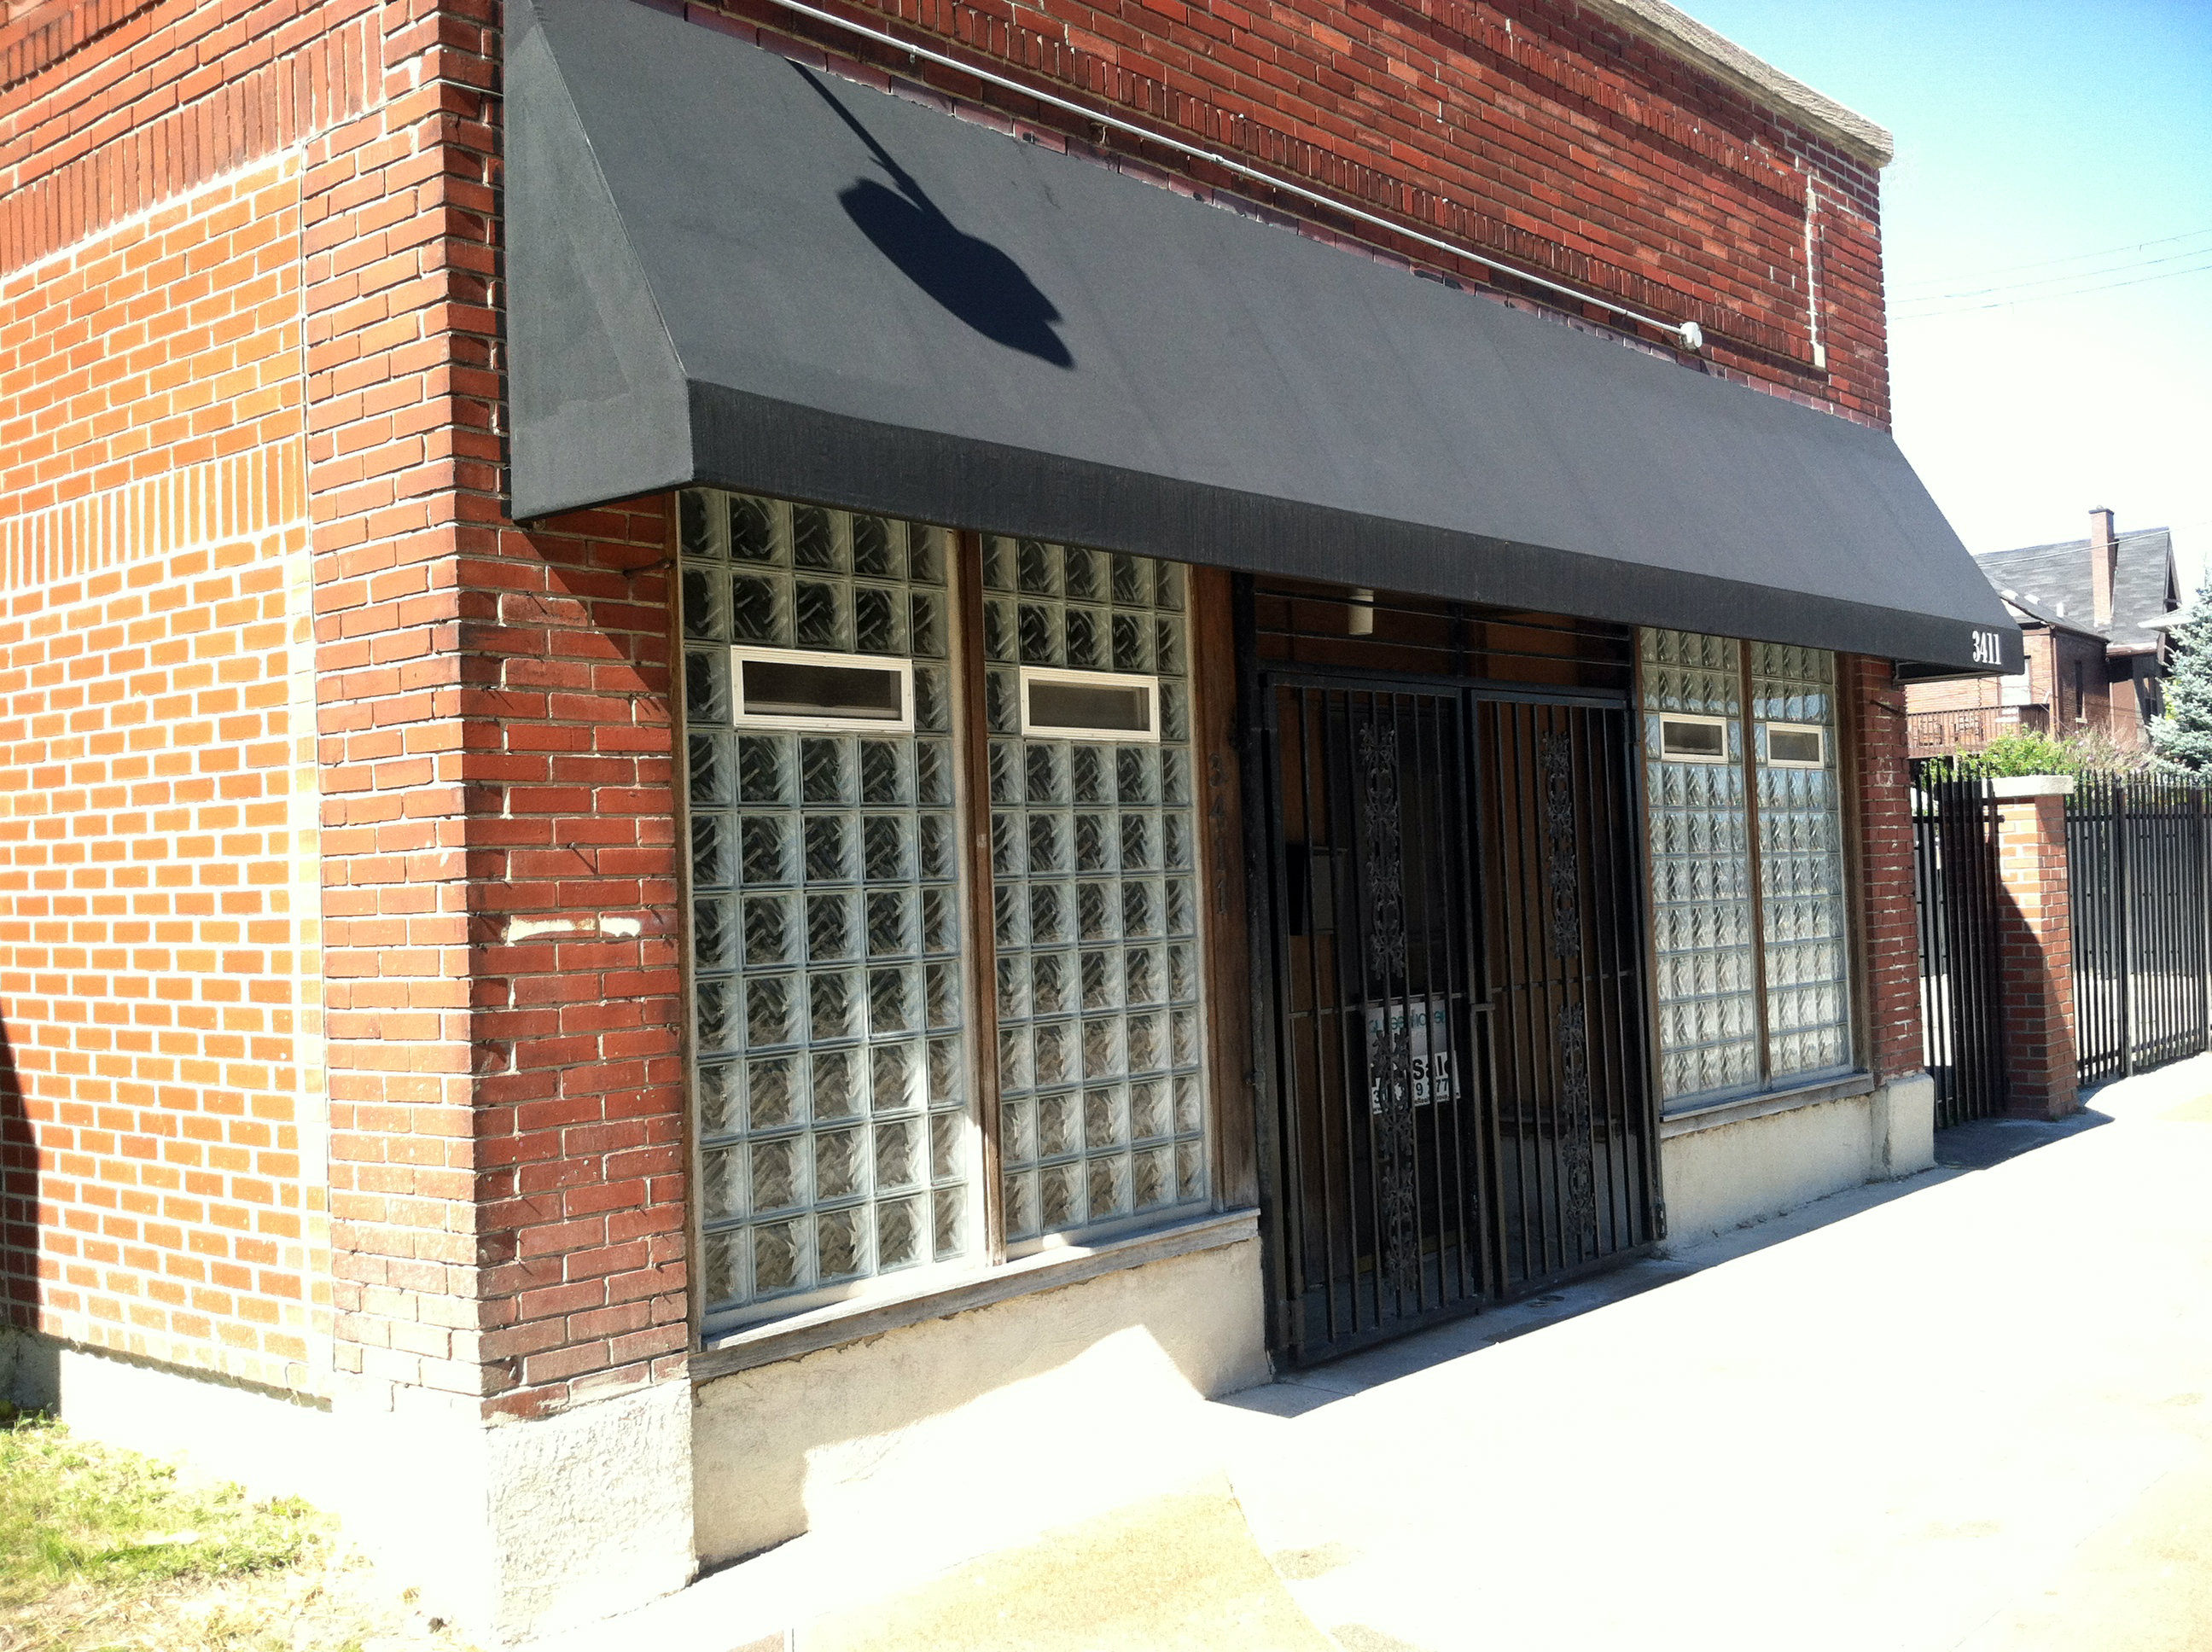 The Le Petit Dejeneur building is gated and displays a "For Sale" sign.